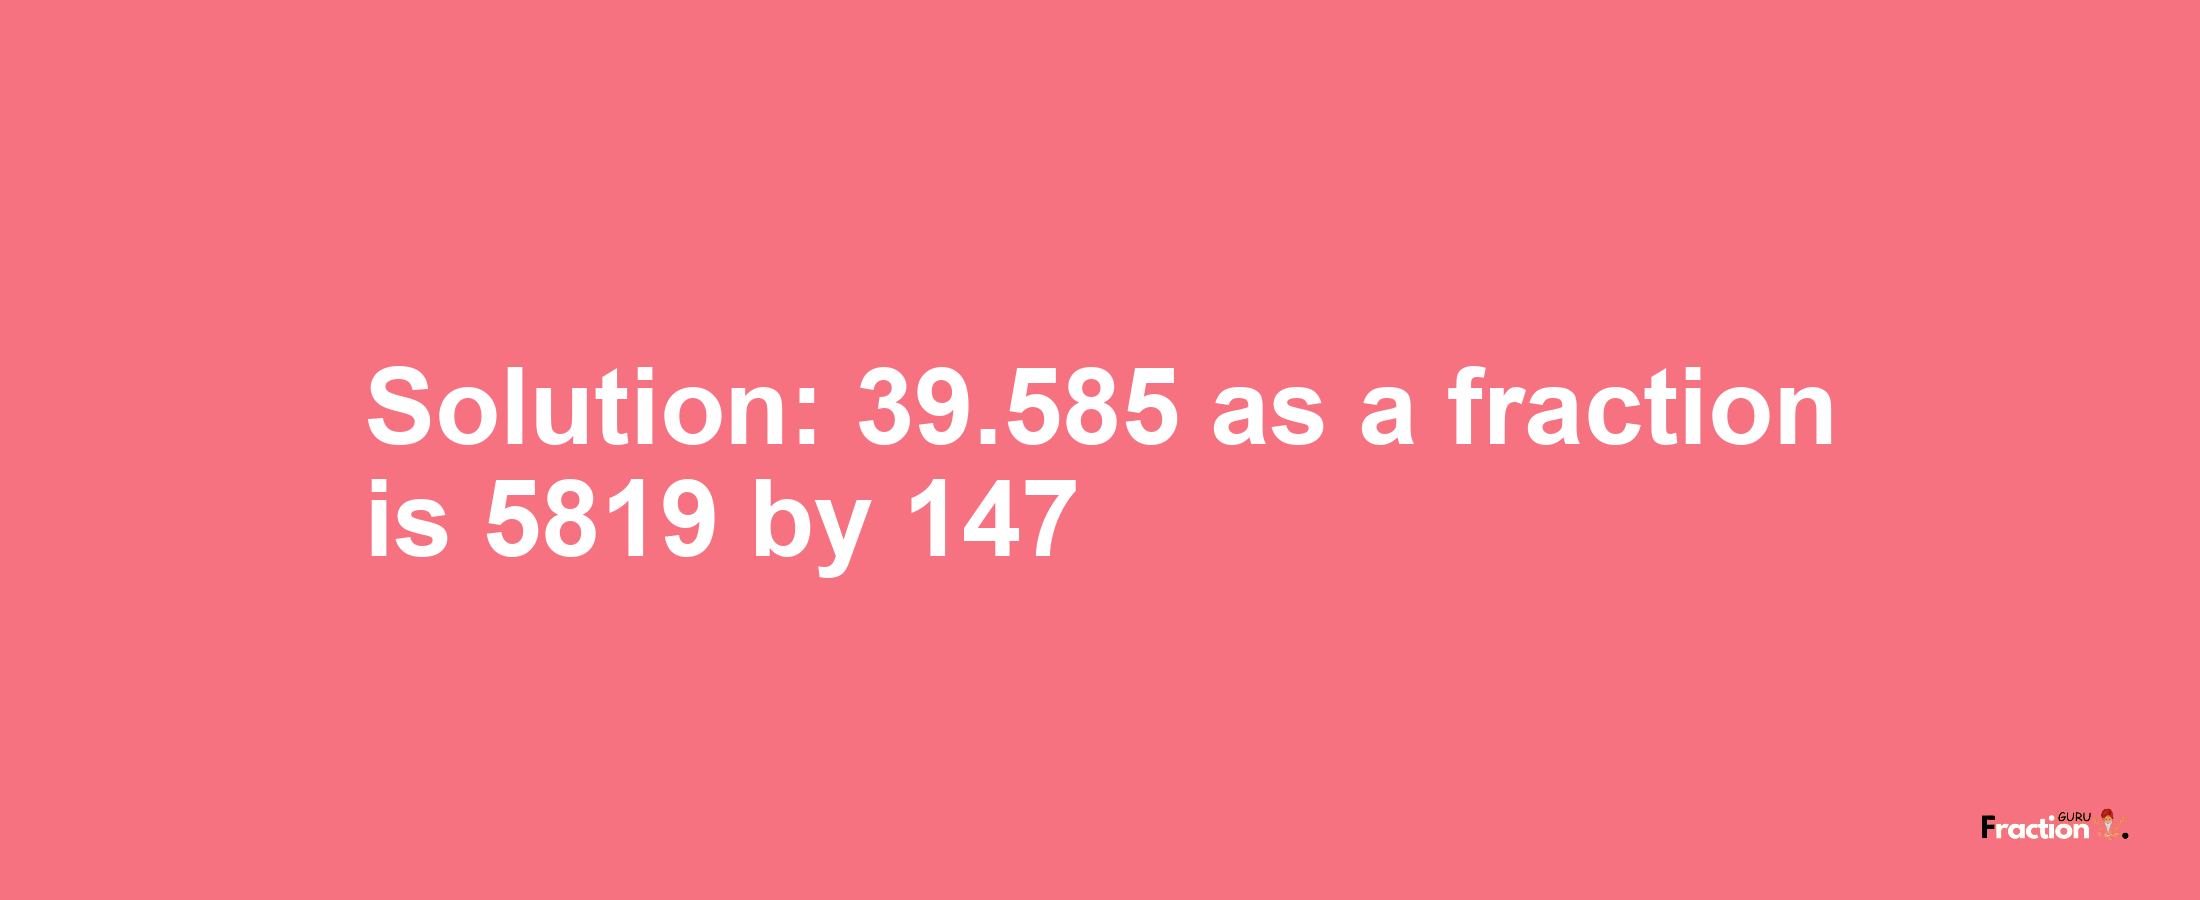 Solution:39.585 as a fraction is 5819/147